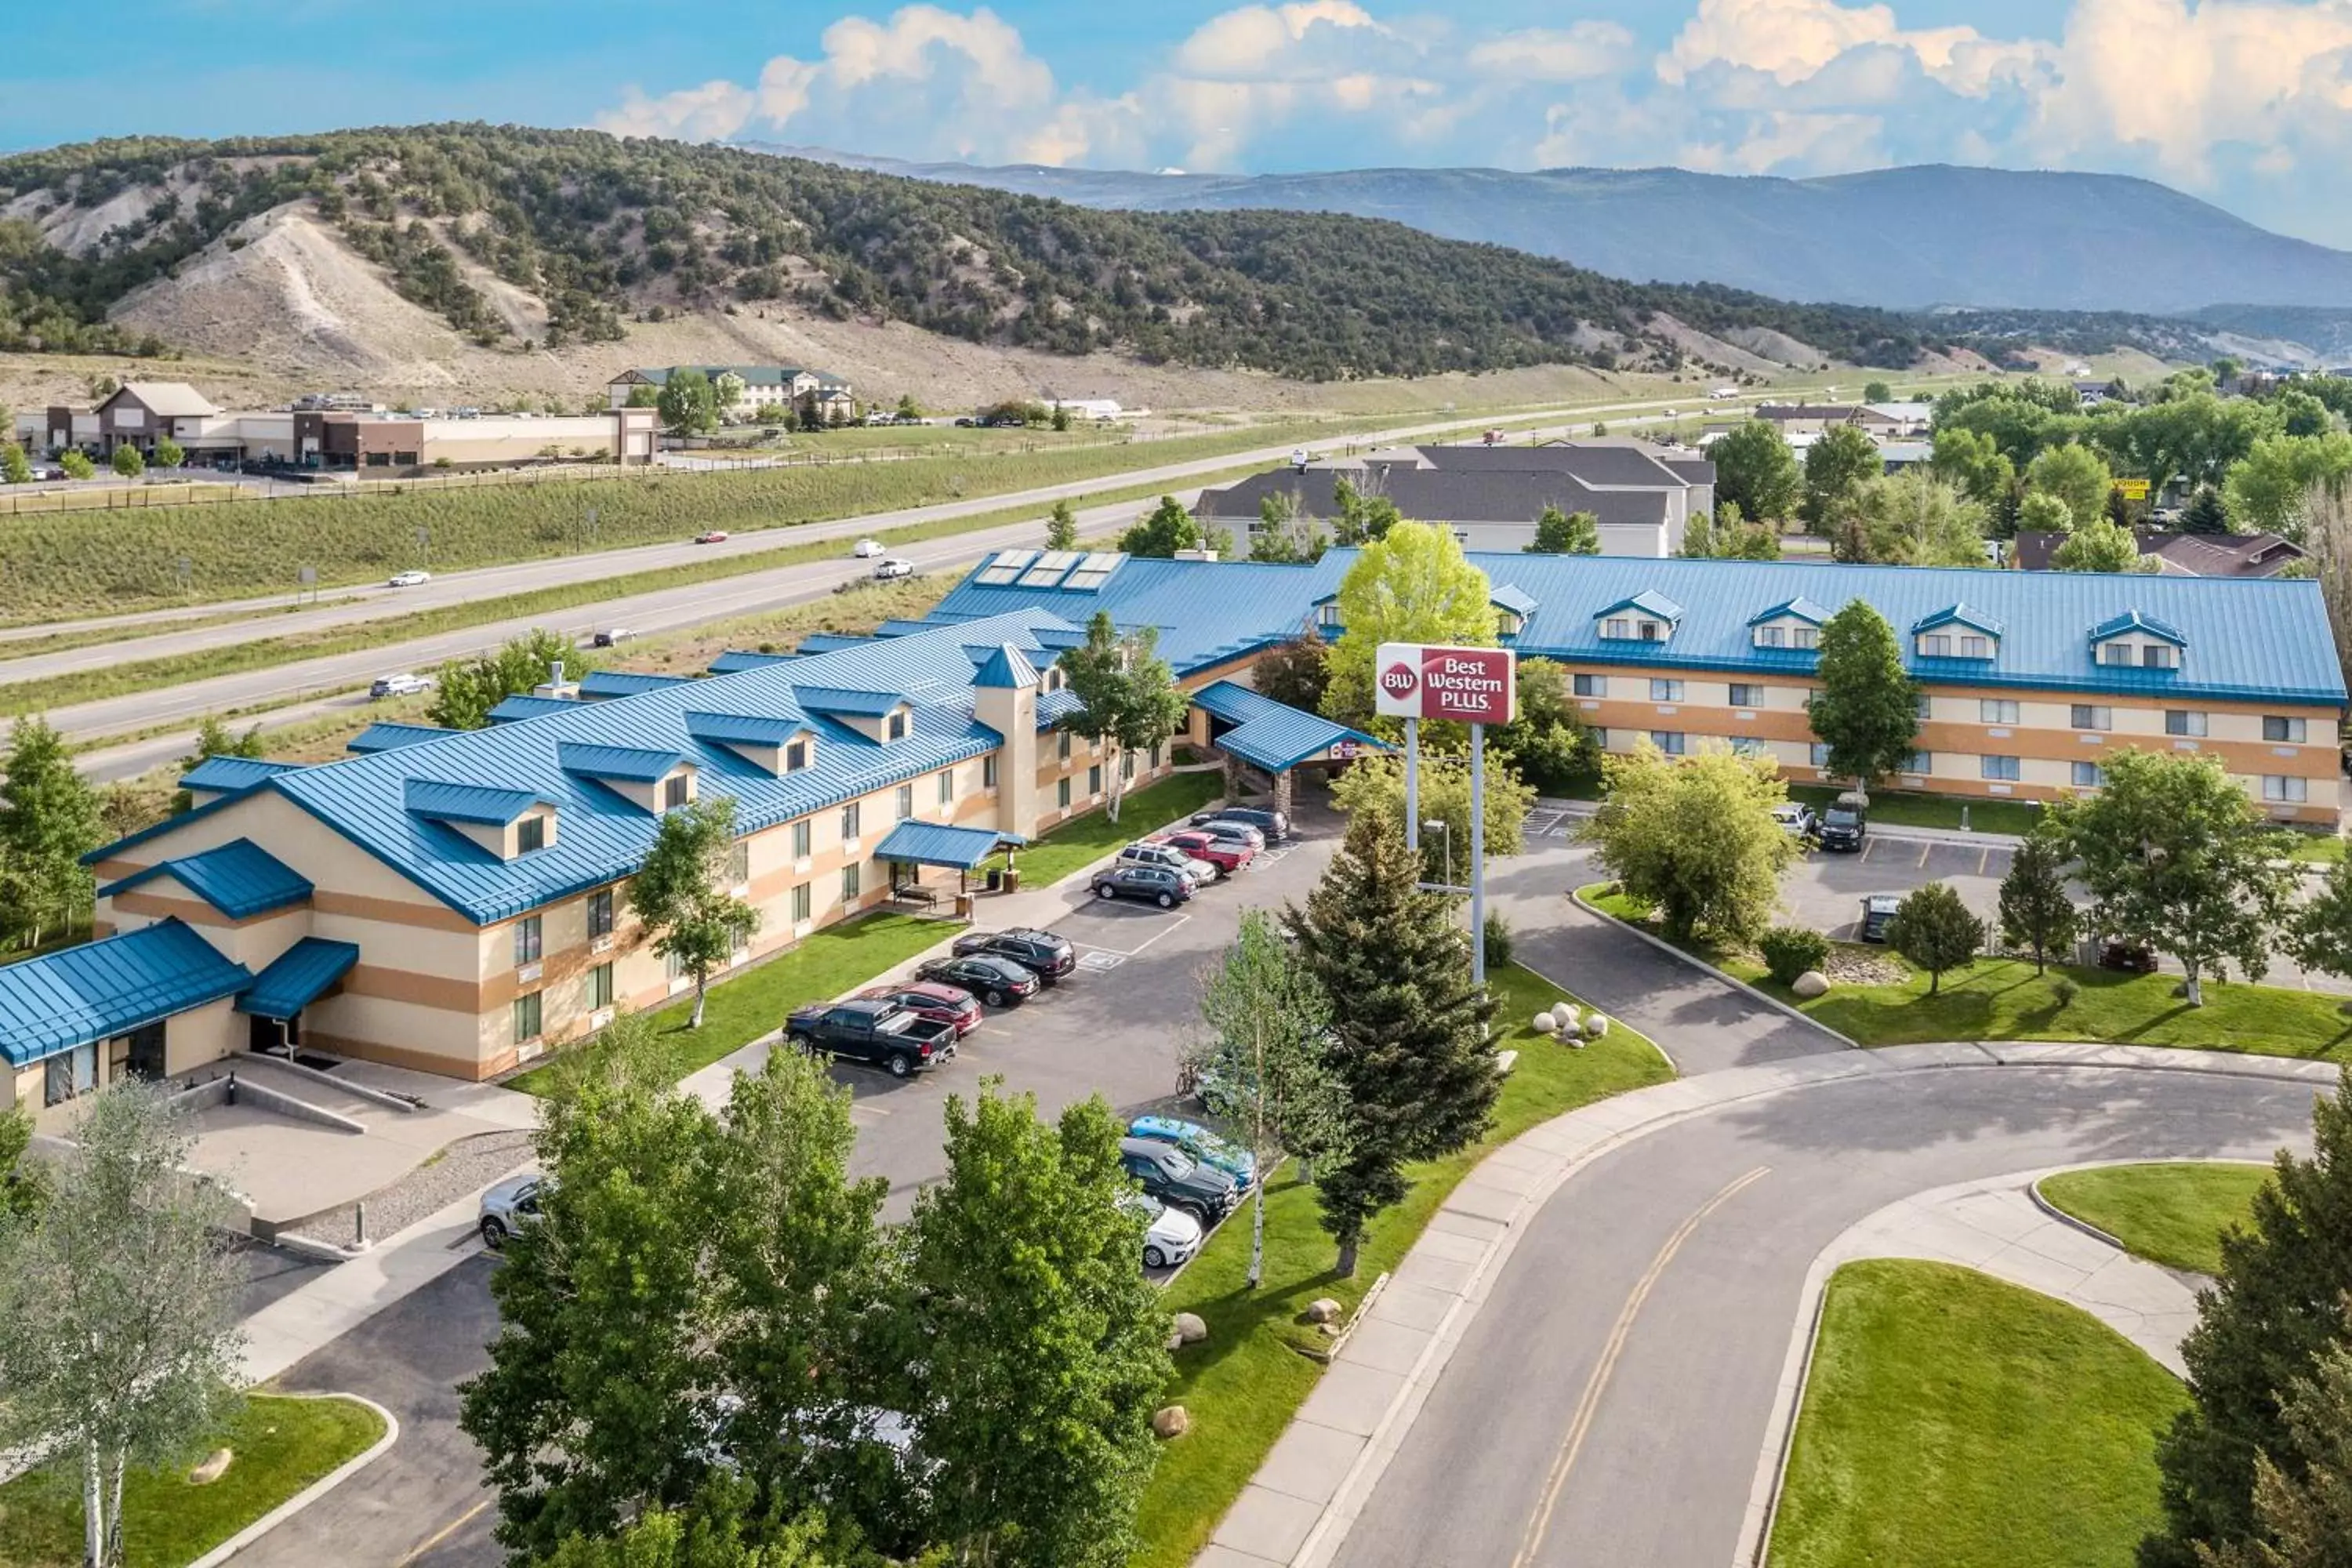 Property building in Best Western Plus Eagle-Vail Valley